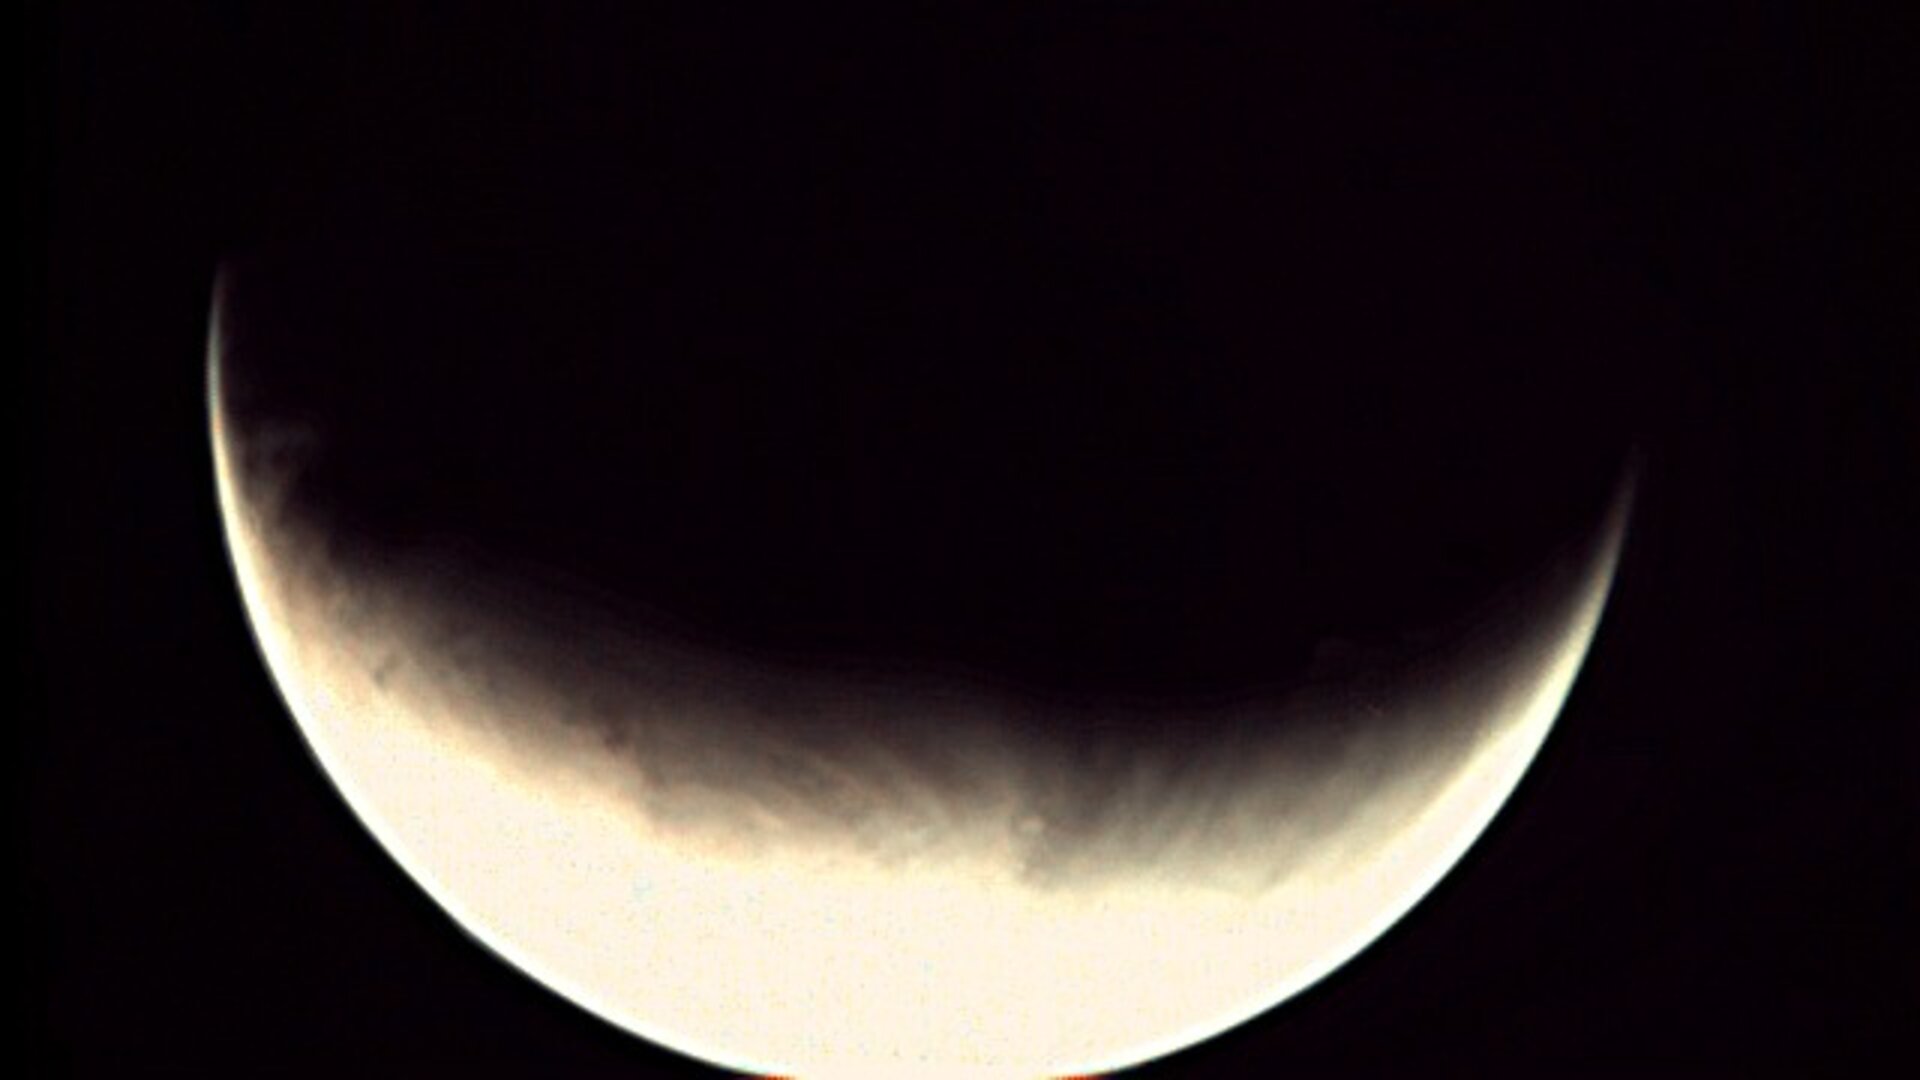 Mars seen by the low-resolution 'webcam' on Mars Express